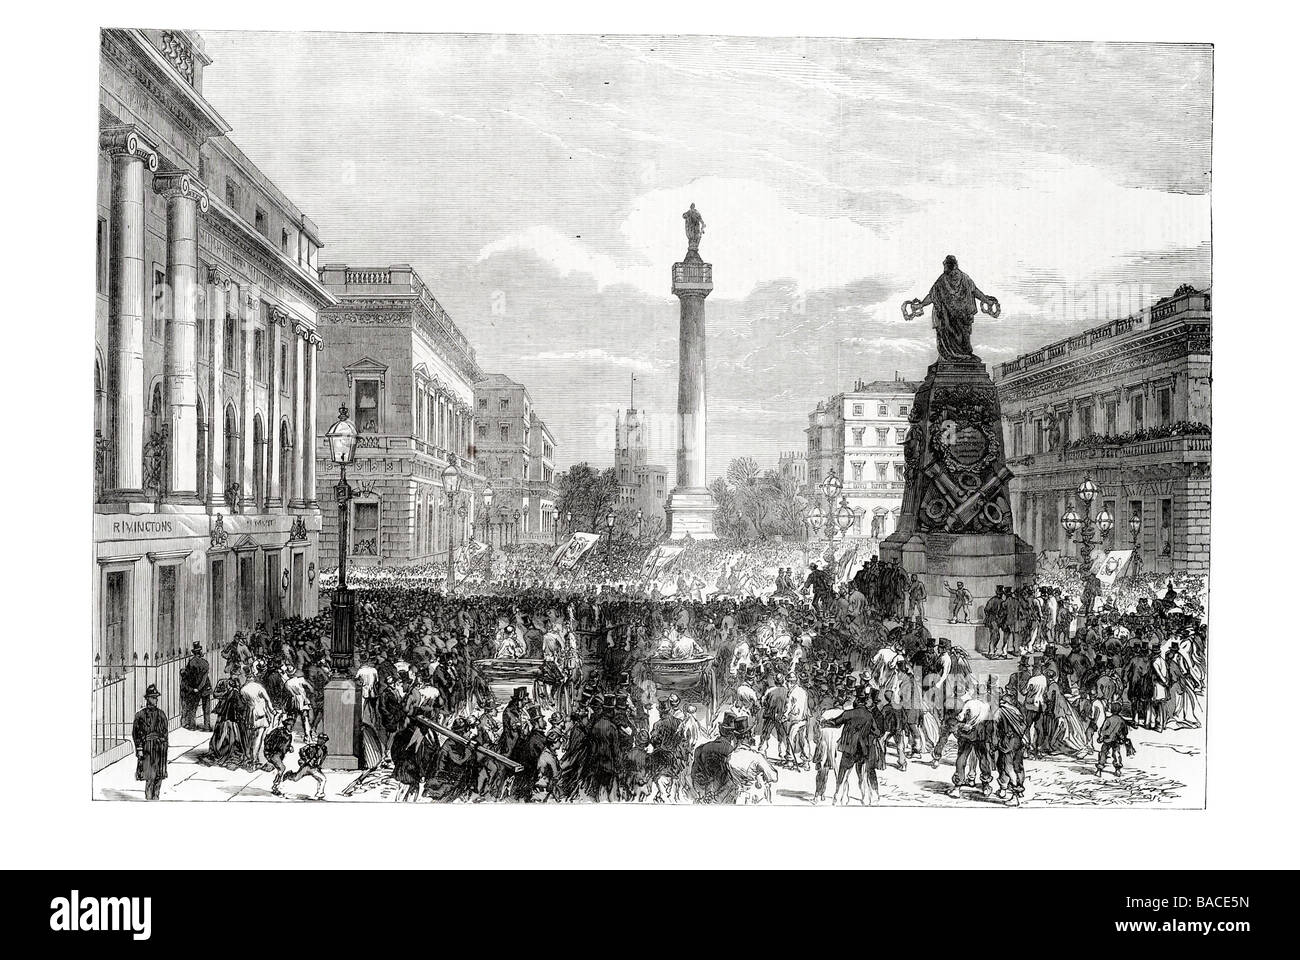 the trades unions reform demonstration on monday last scene in waterloo place 1867 Stock Photo